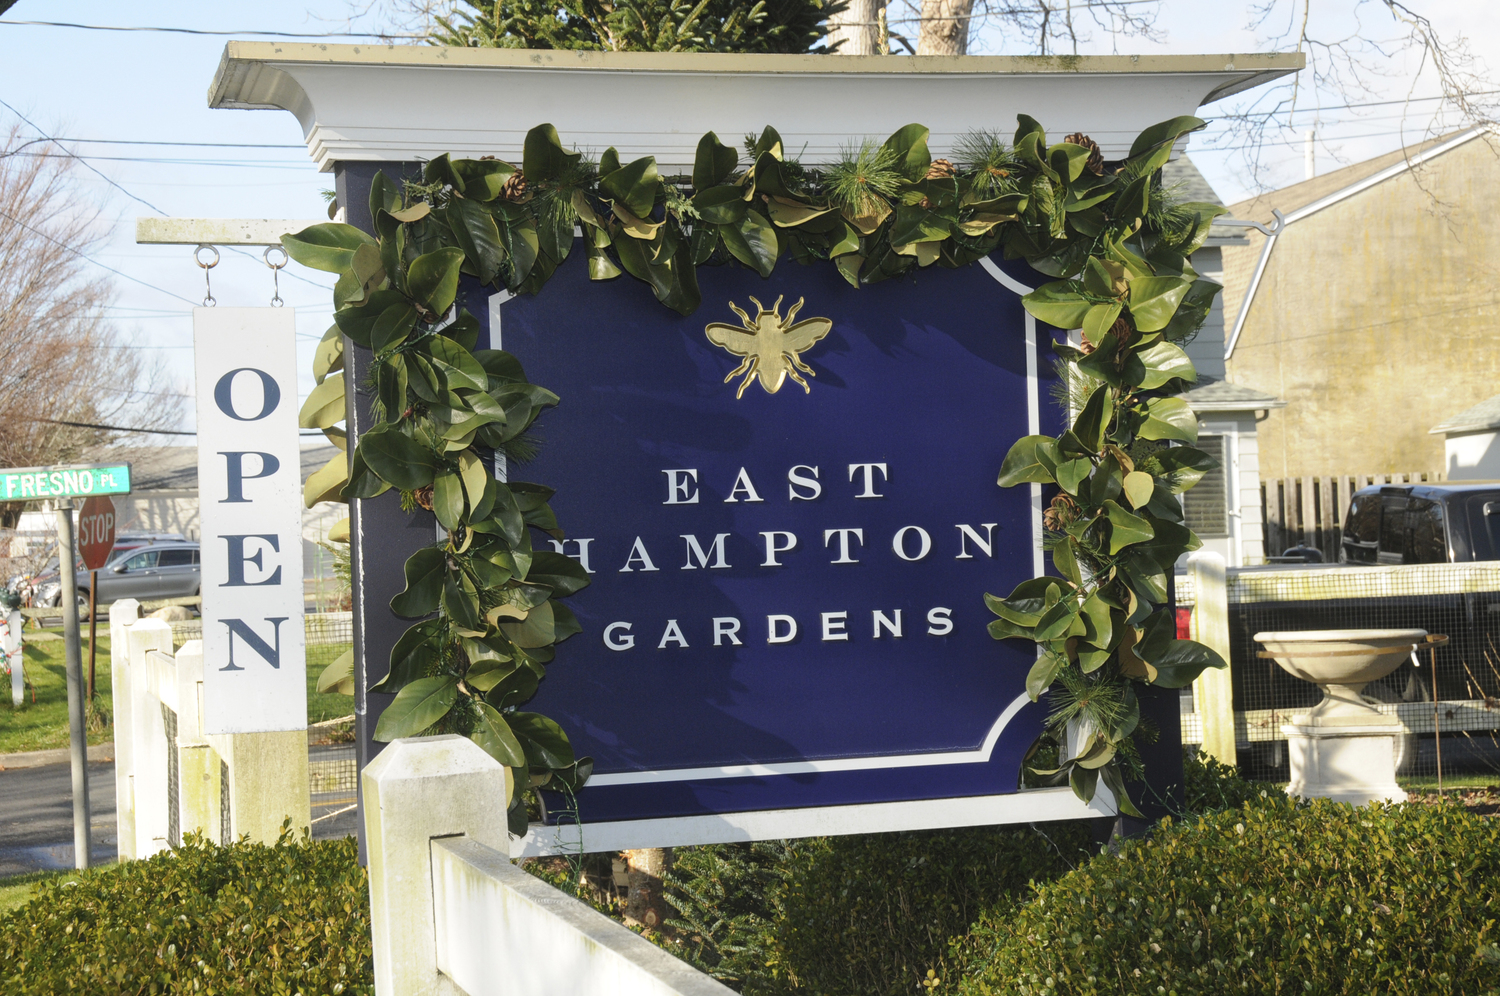 East Hampton Gardens decked out for the 2022 Holiday Season.  RICHARD LEWIN